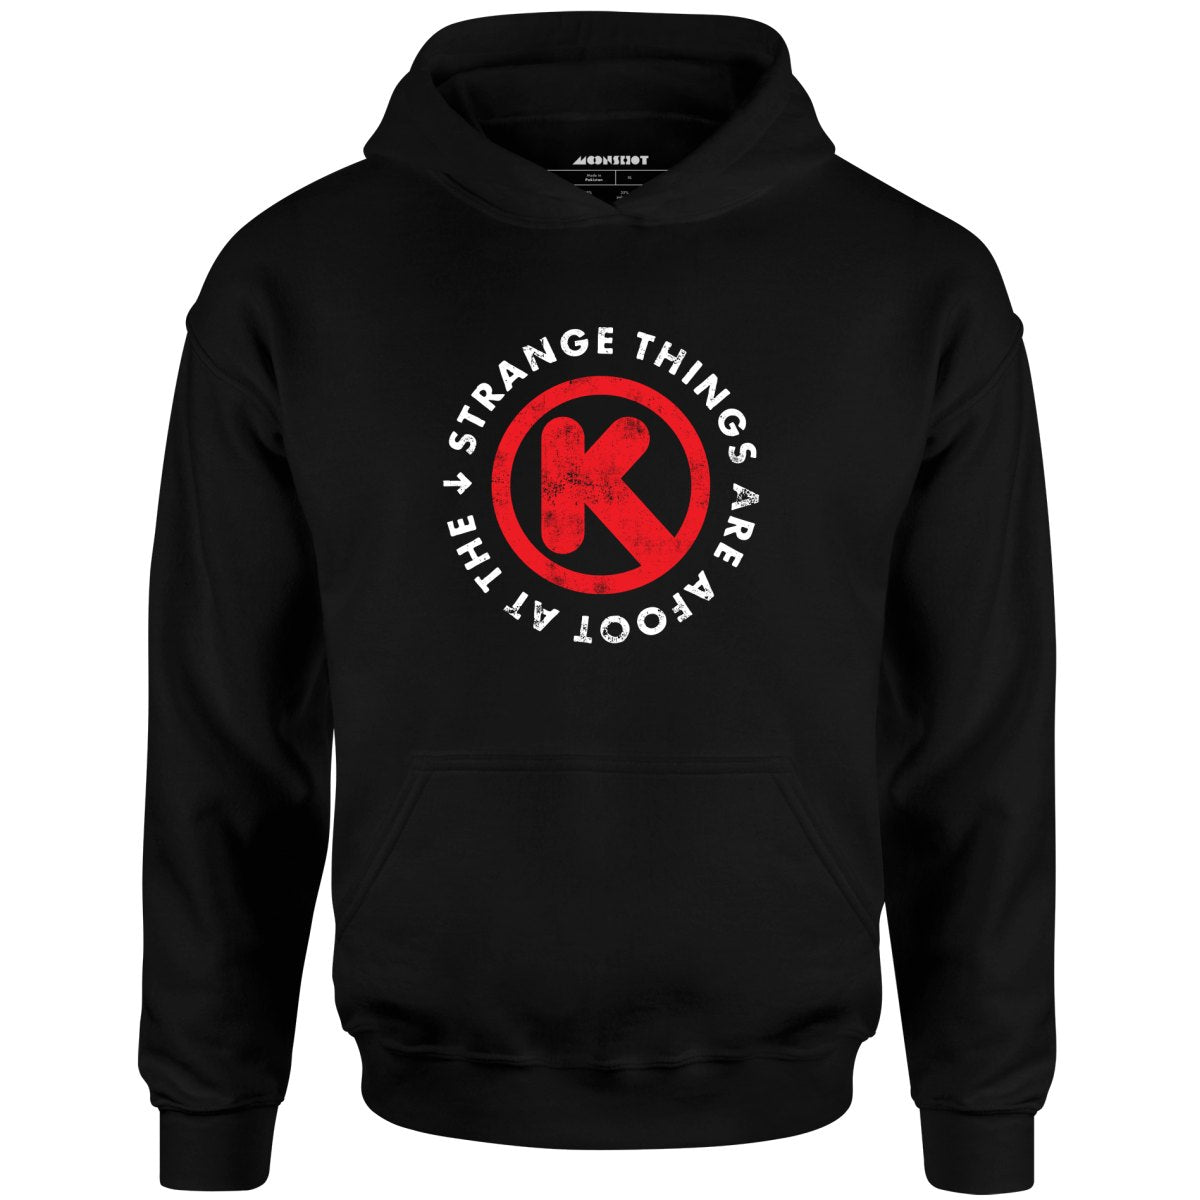 Strange Things are Afoot at the Circle K - Unisex Hoodie